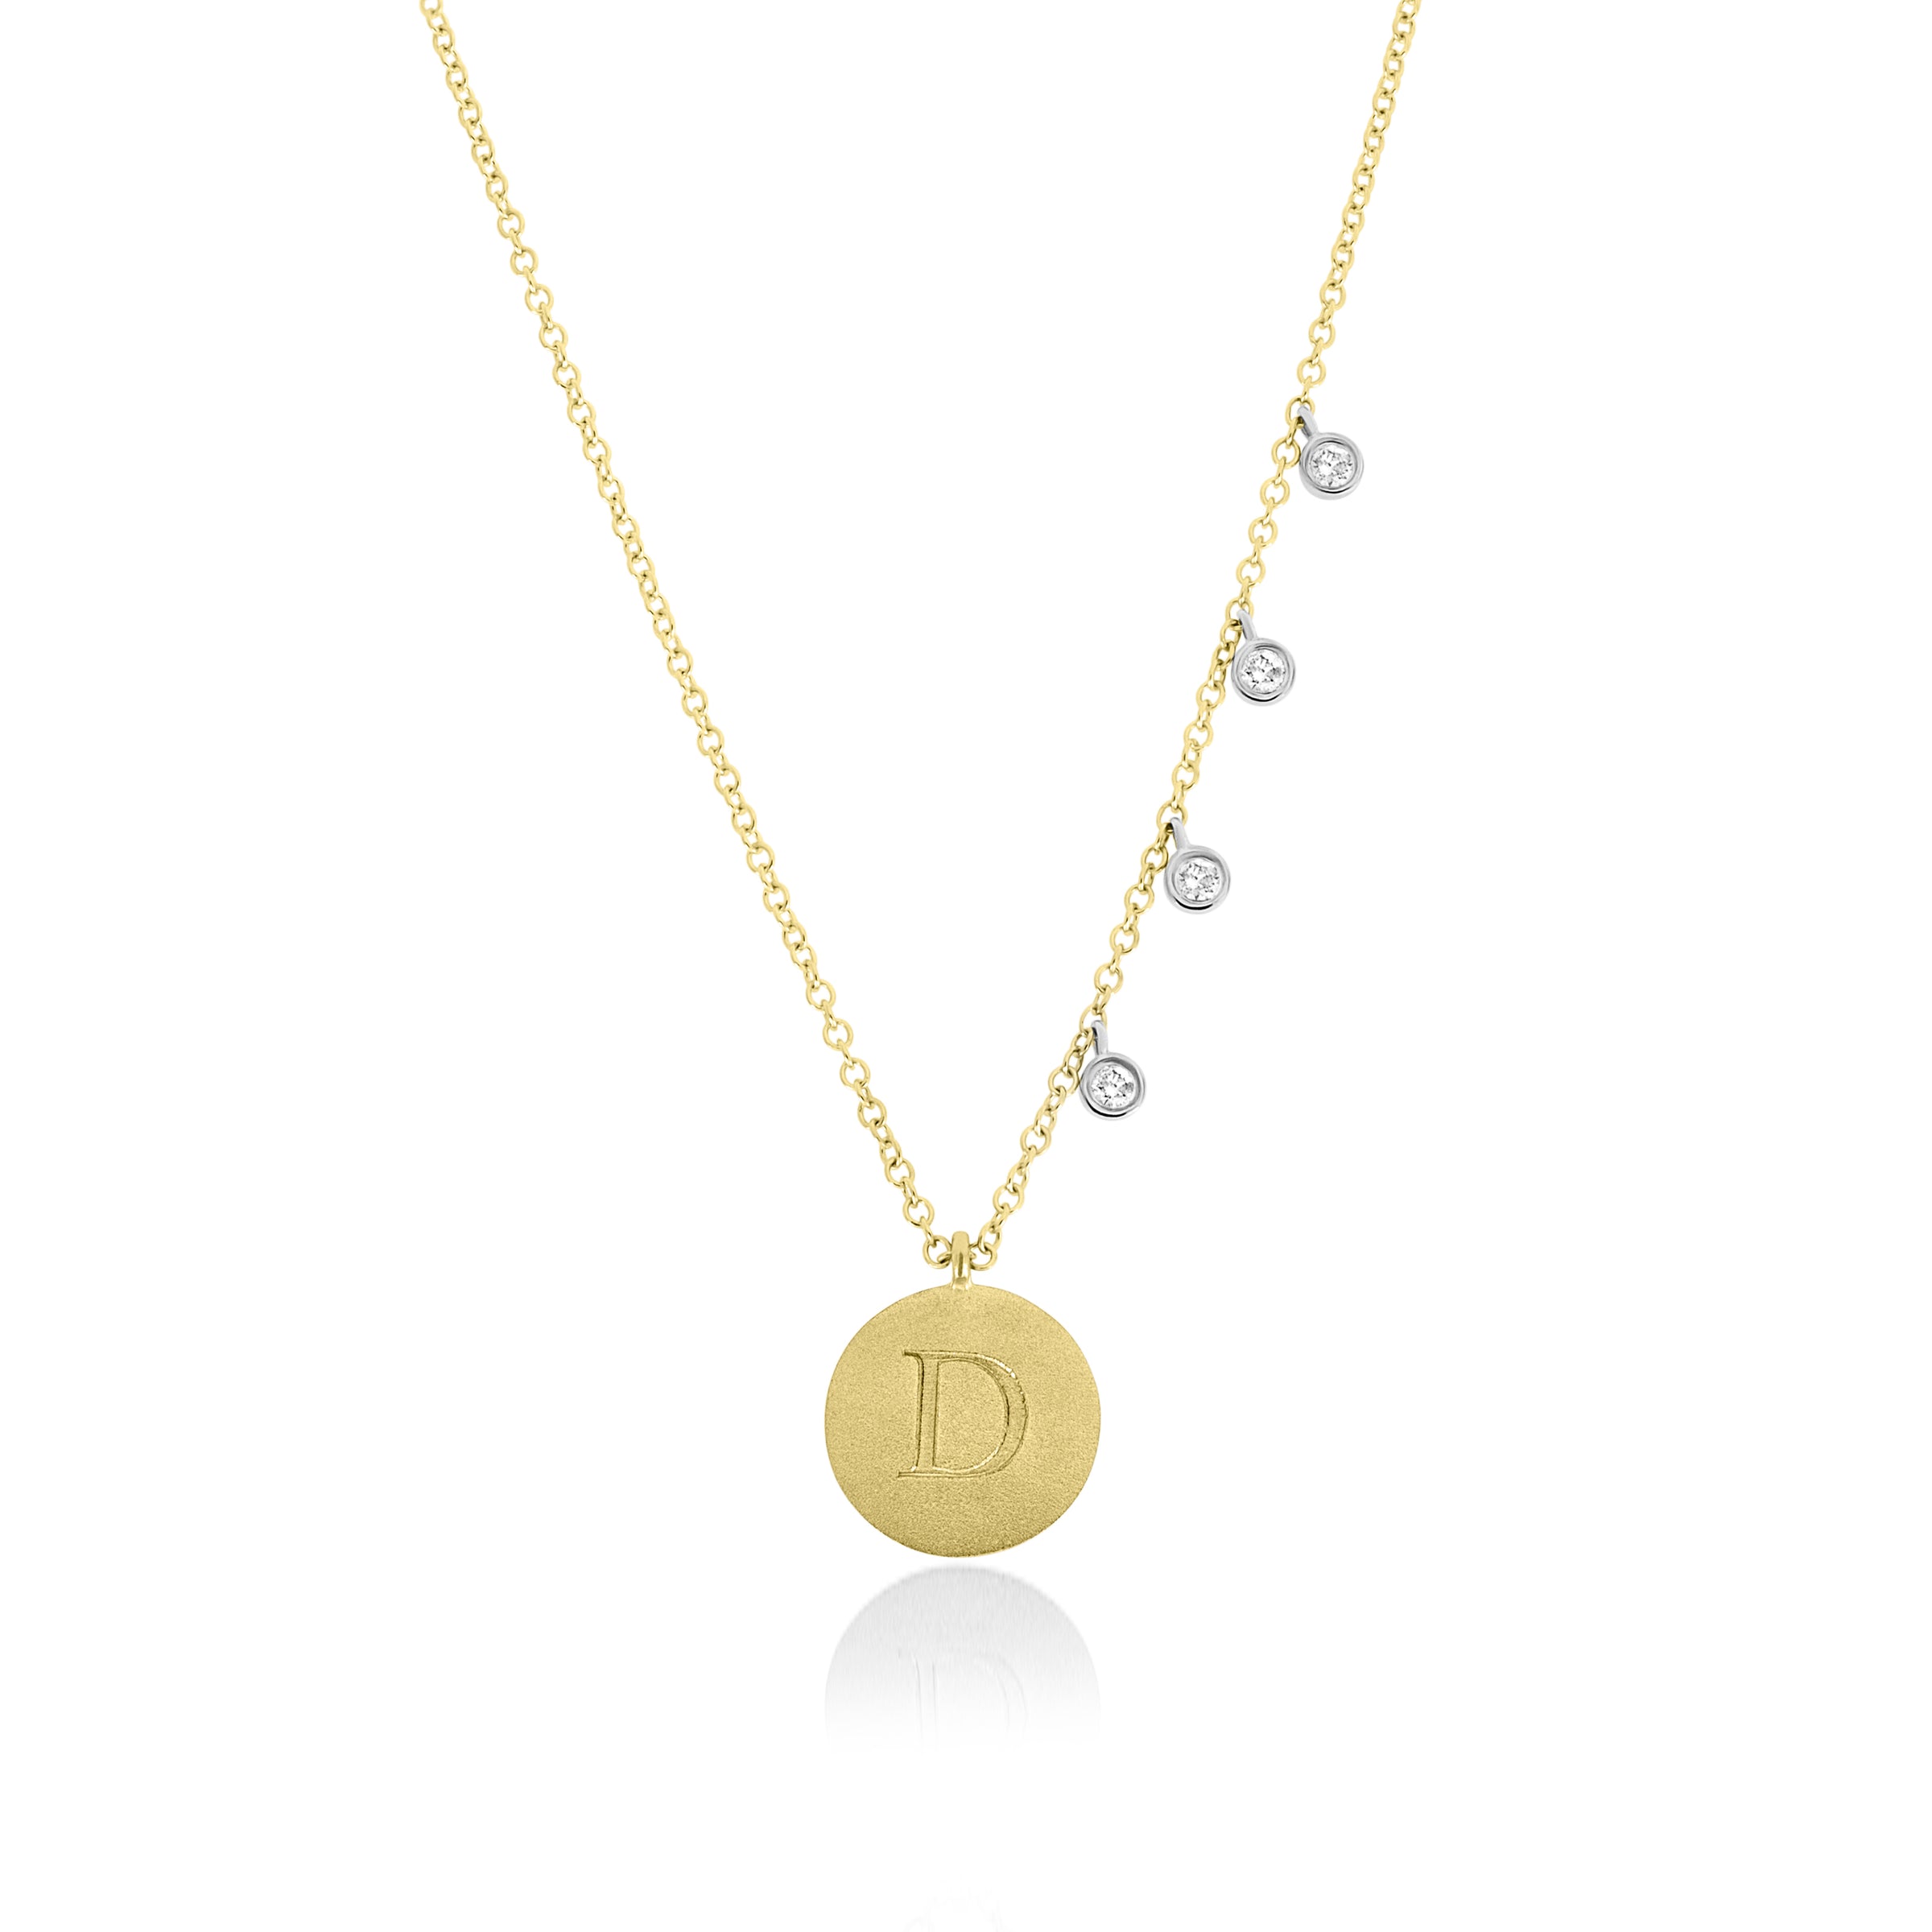 The Lulu Necklace - Small Initial Necklace - Gold, Silver | Misuzi